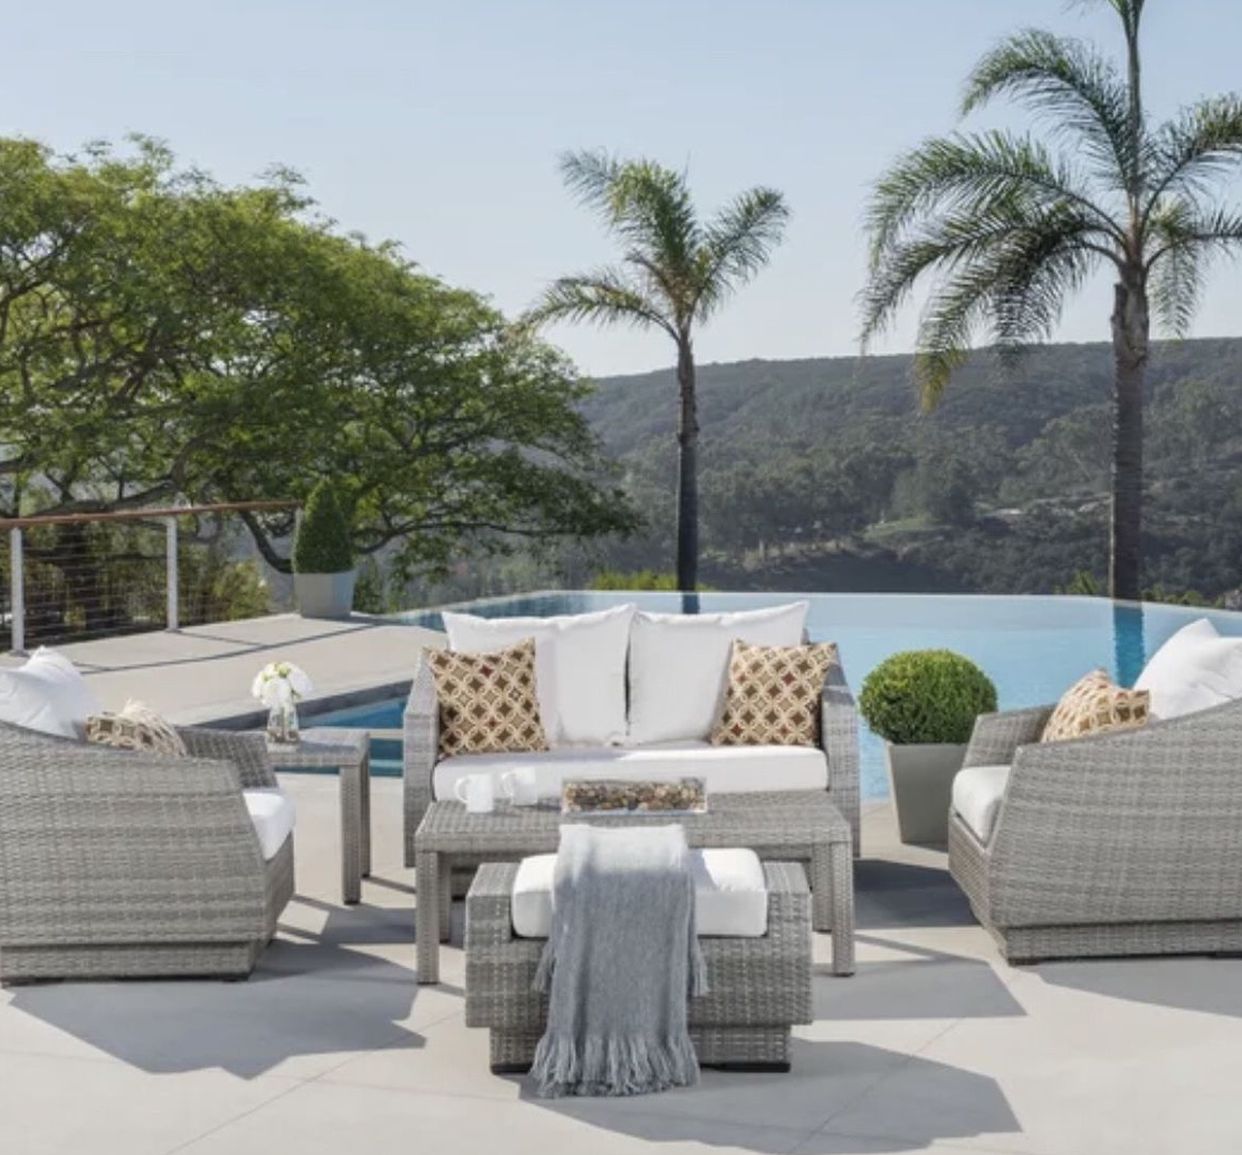 6 Piece Outdoor Furniture Set - Great Condition - Like New